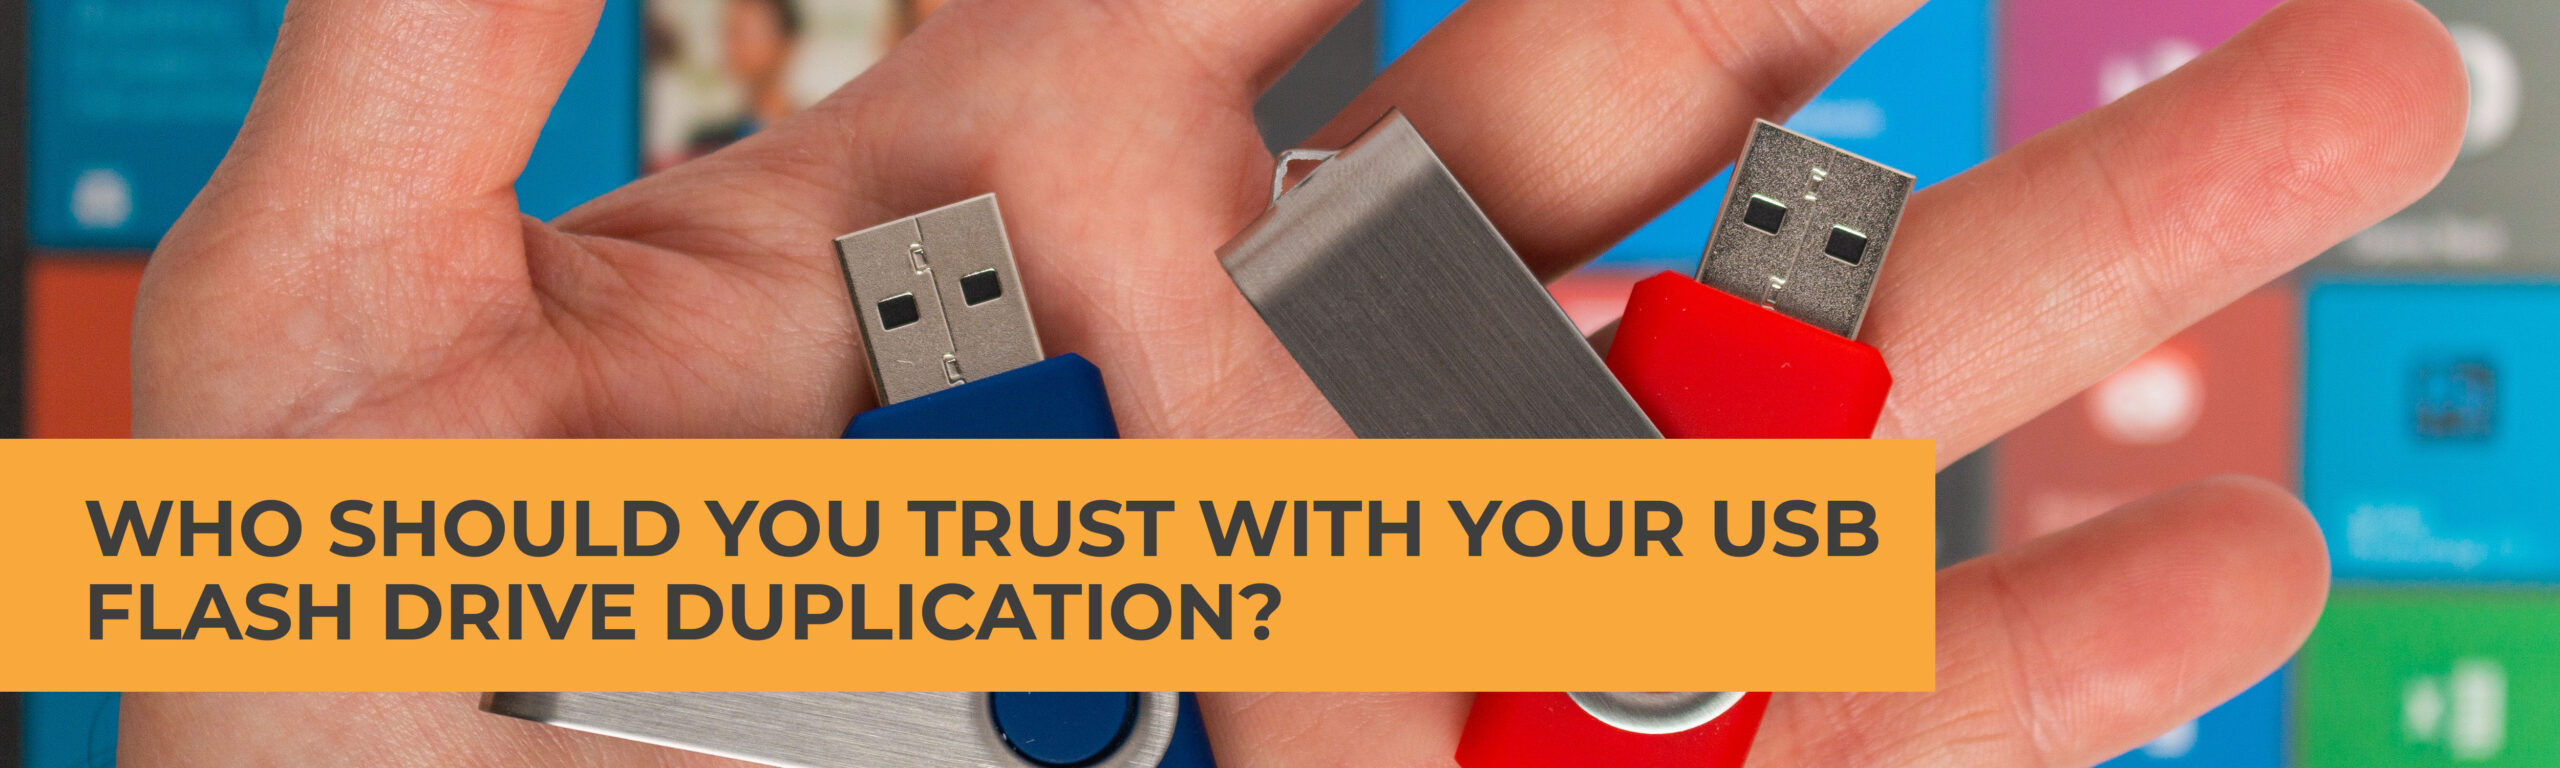 Who Should You Trust with Your USB Flash Drive Duplication?